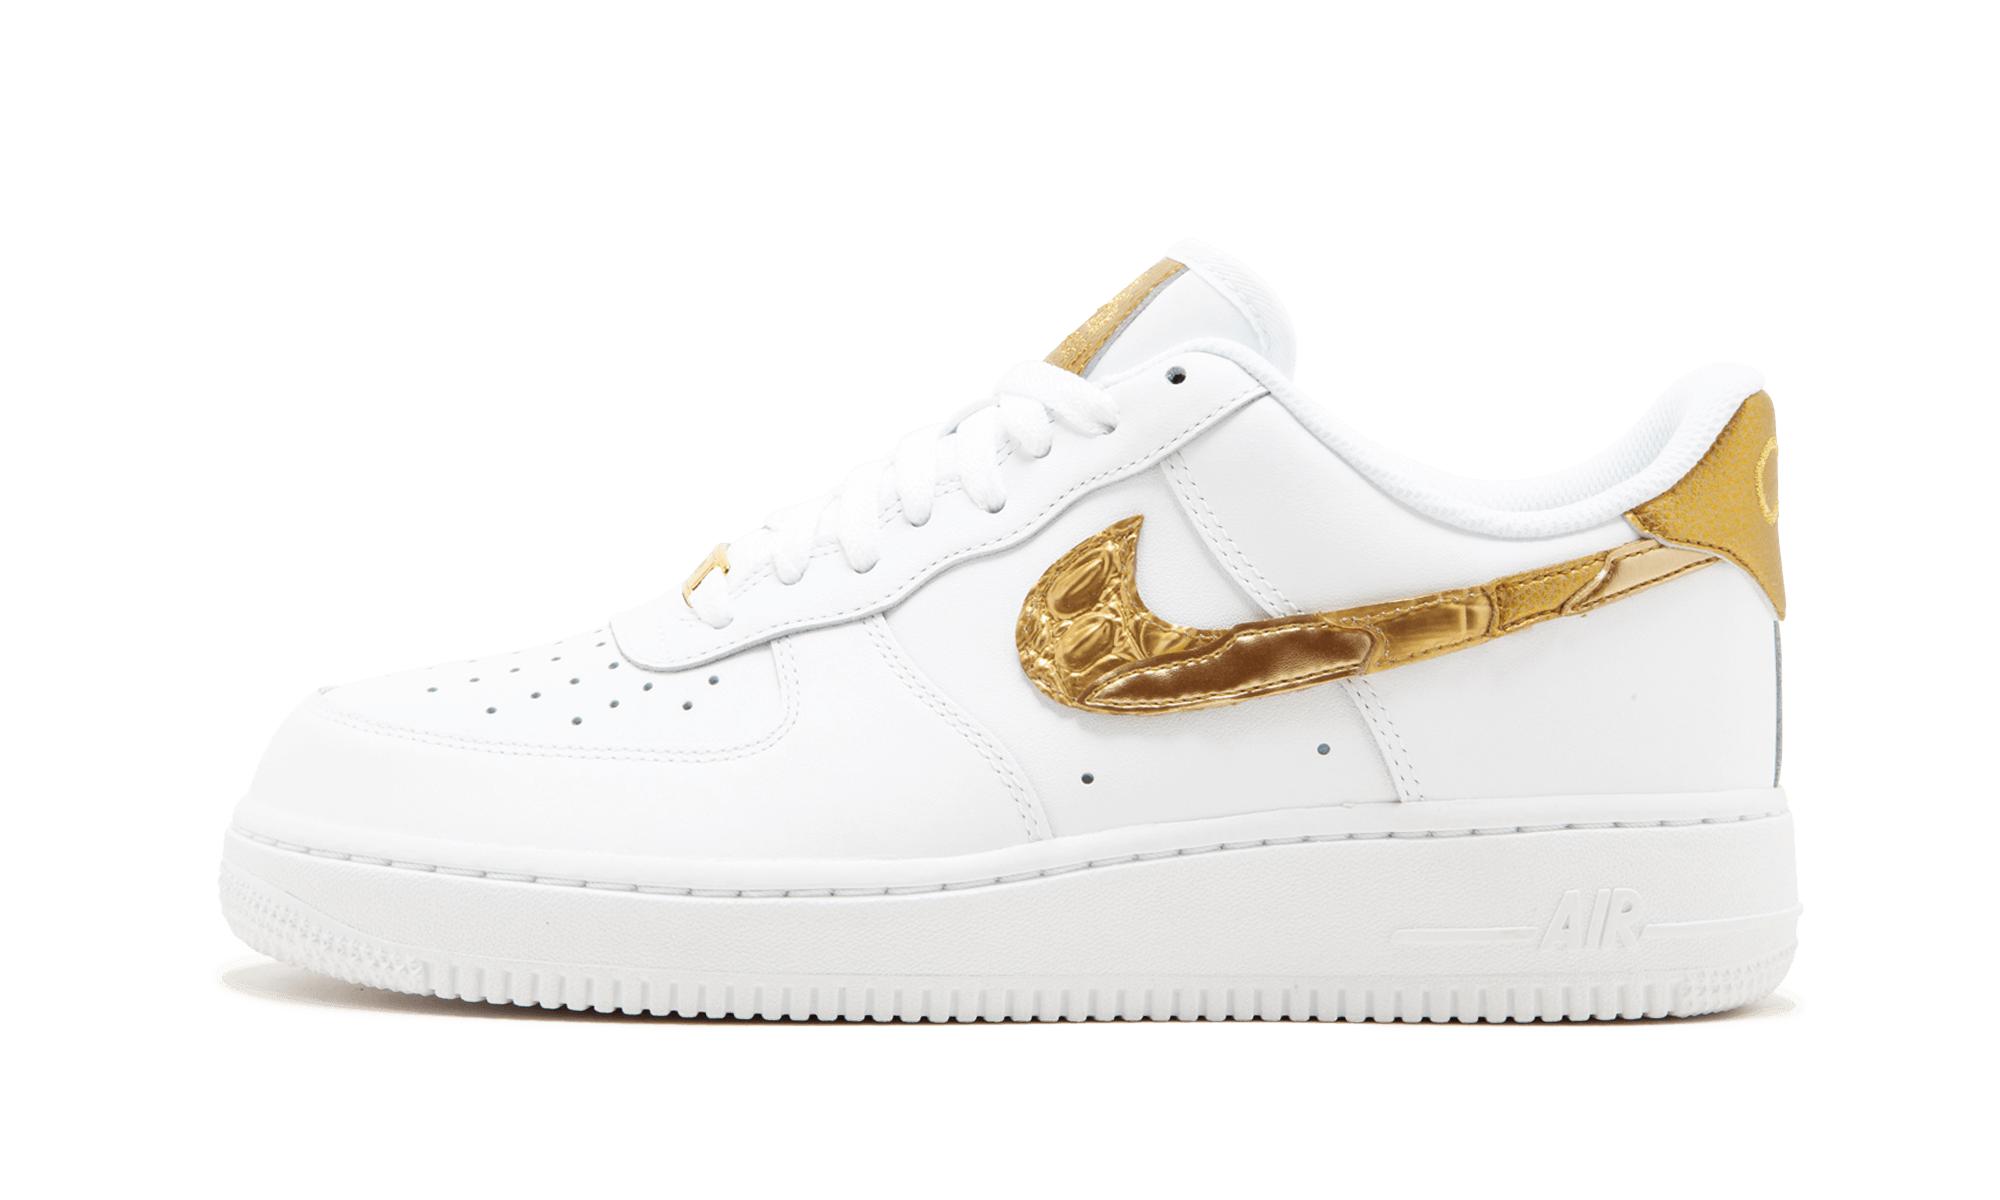 Lyst - Nike Air Force 1 '07 Cr7 in White for Men